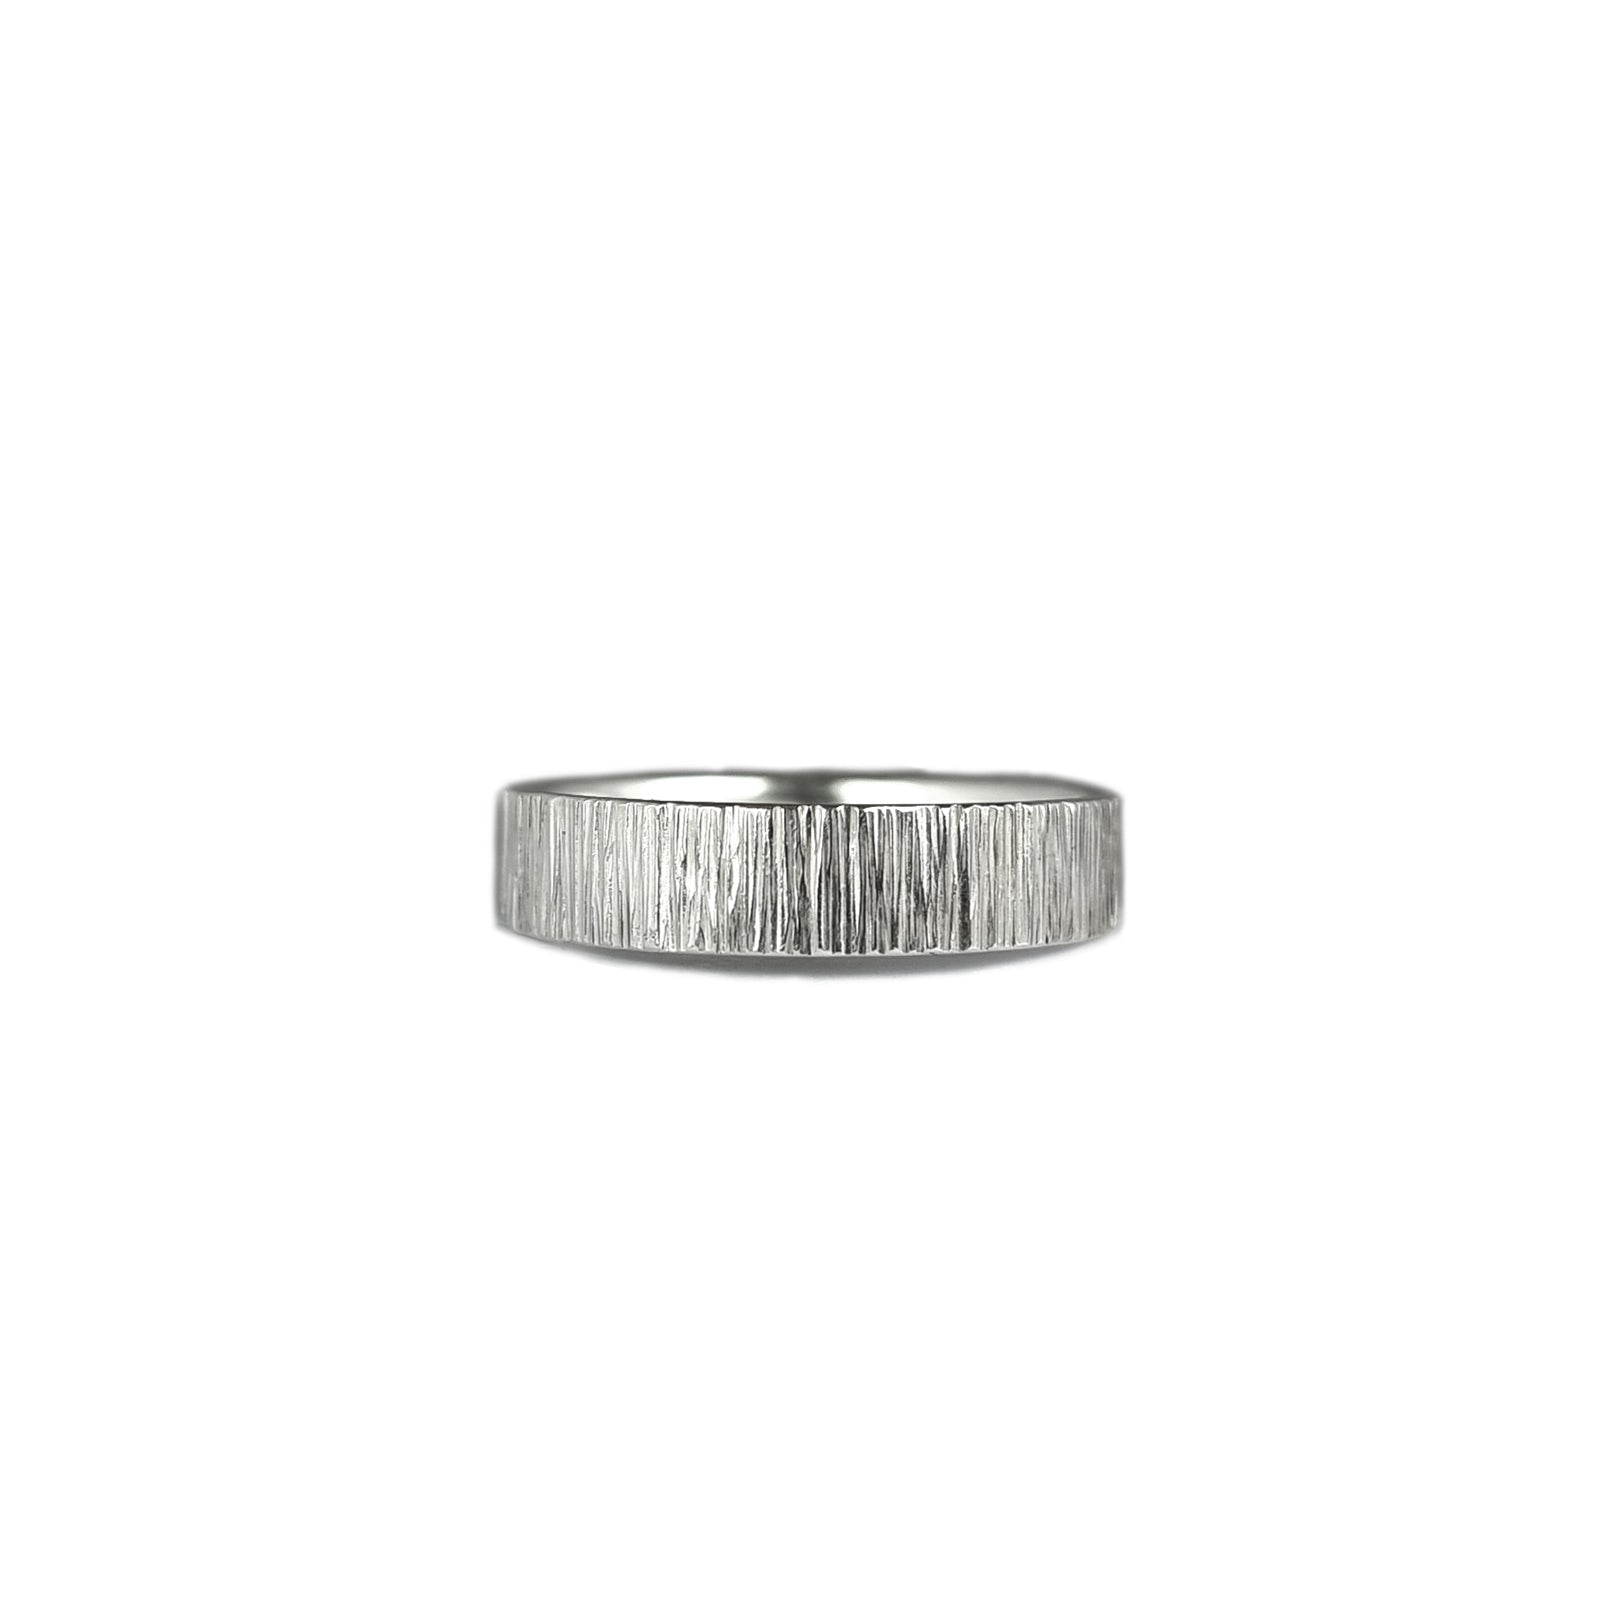 Emily Eliza Arlotte Jewellery - Gender Neutral Unisex Genderless Textured Sterling Silver Ring Mens jewelry Handmade Wedder Wedding Band Marriage Simple Contemporary Handmade Handcrafted Made in Tasmania Australia Ethical Eco Environmentally Friendly